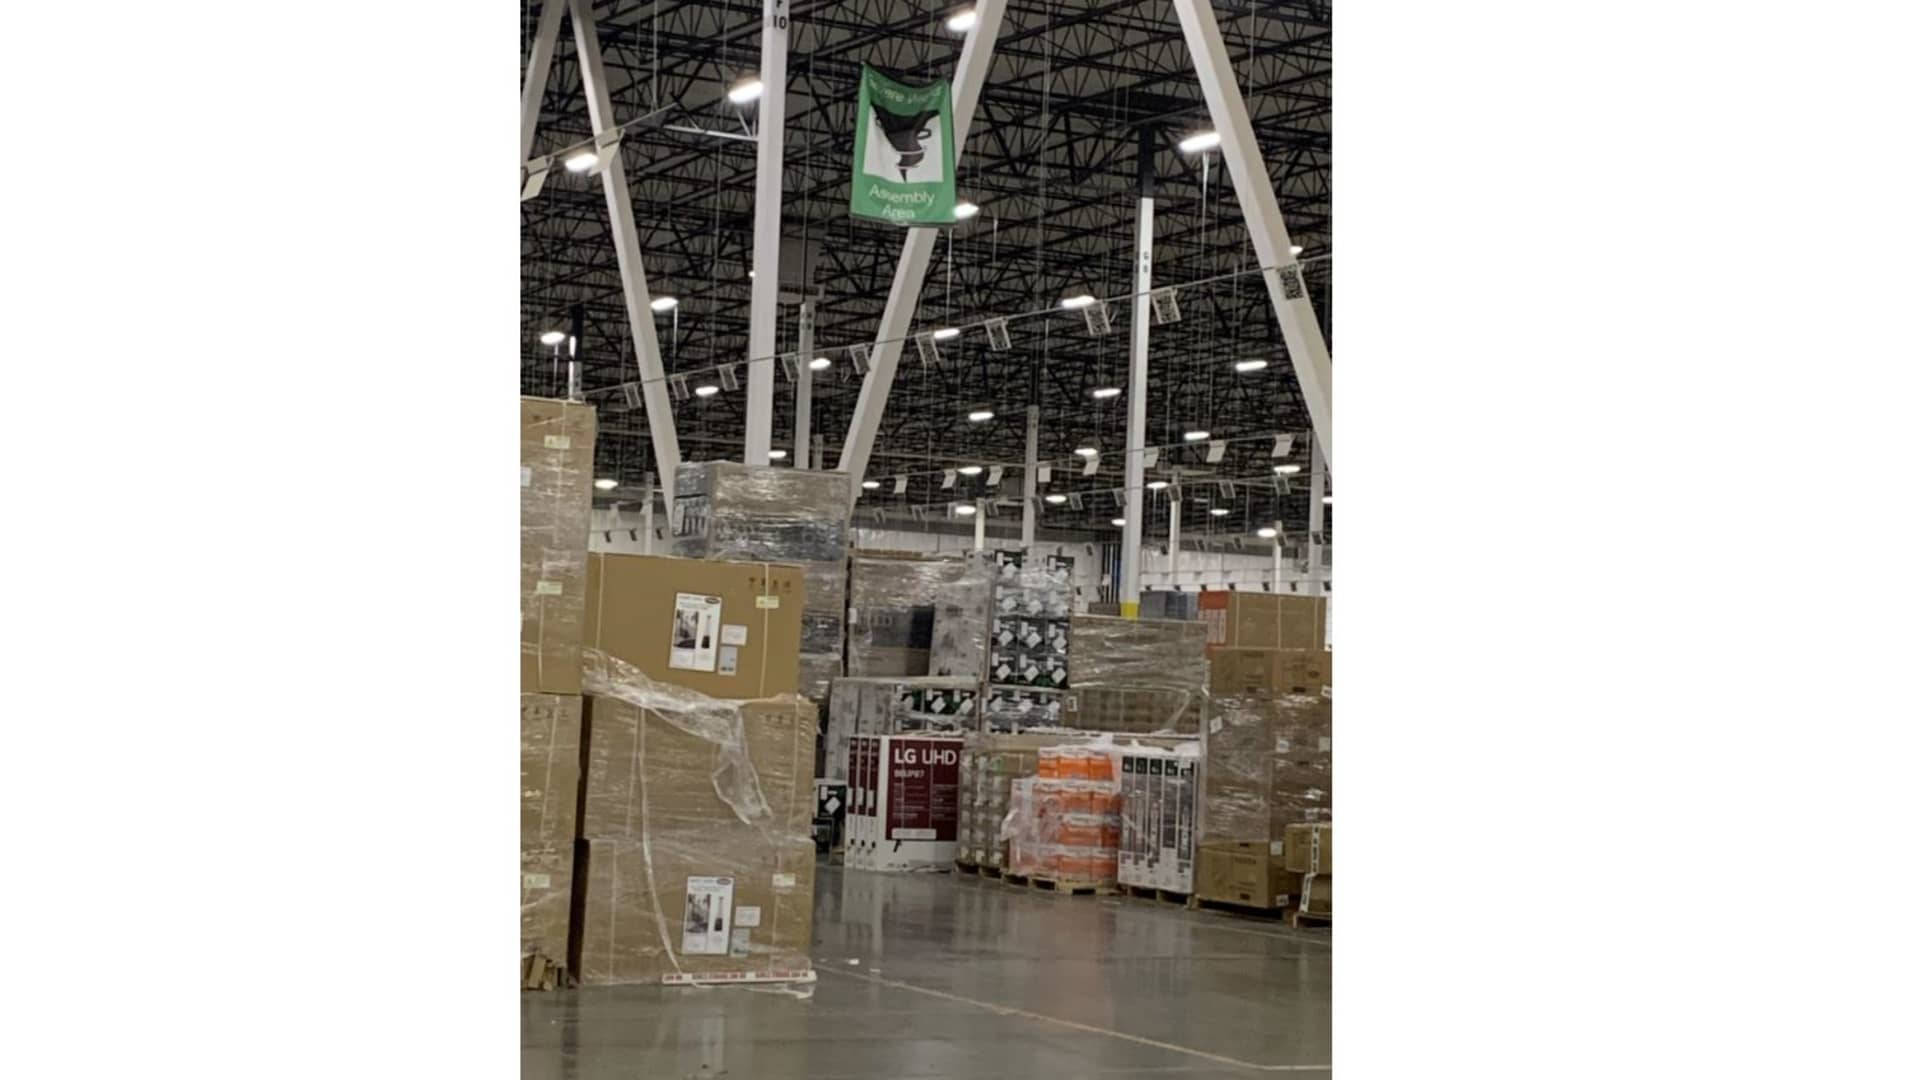 A tornado assembly area in an Edwardsville, Illinois, Amazon warehouse, known as STL6.